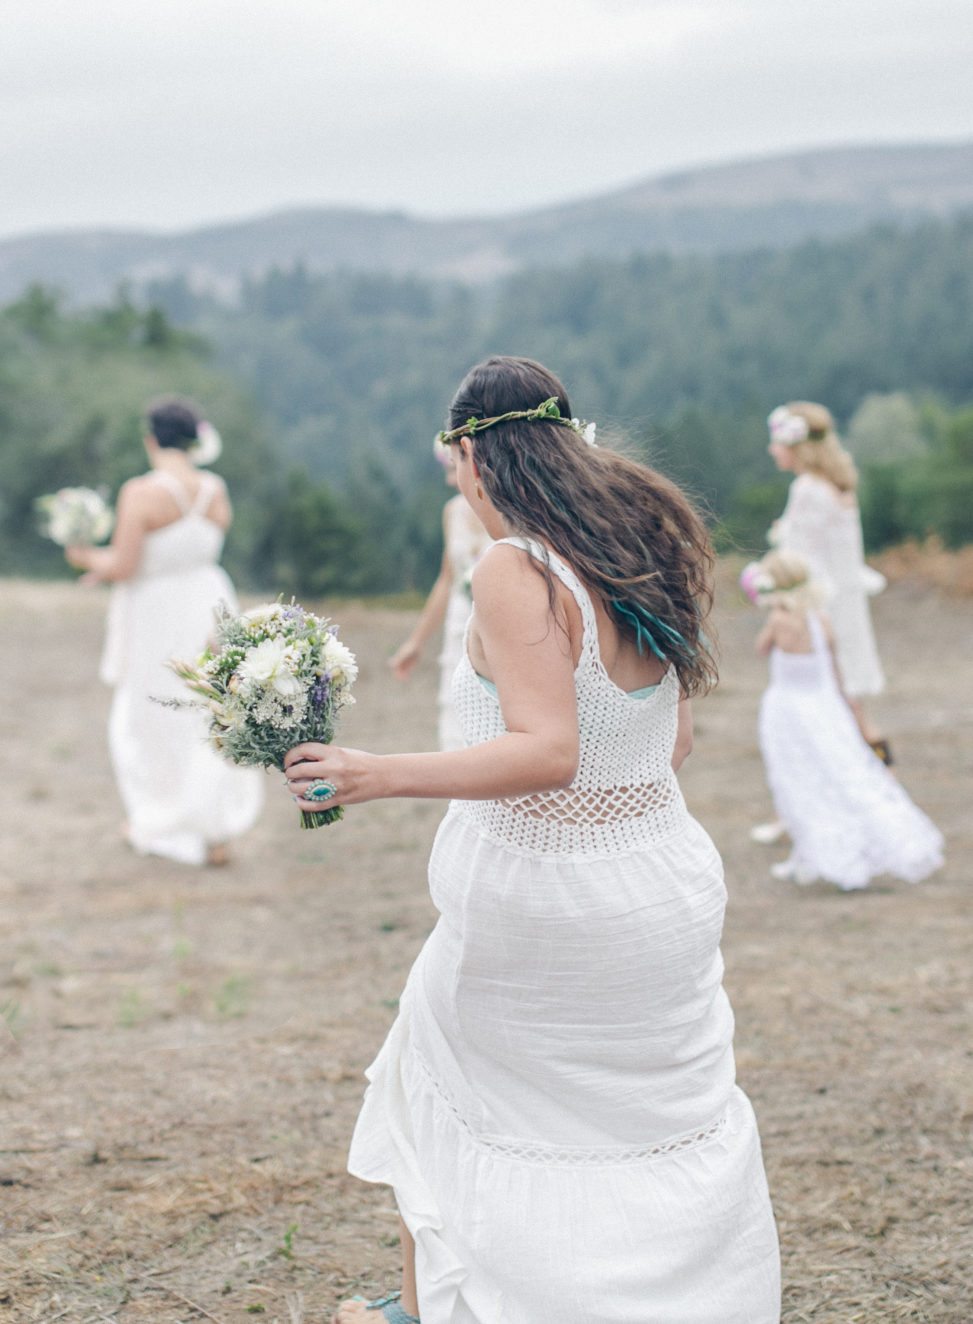 photo of a bridal party waking away